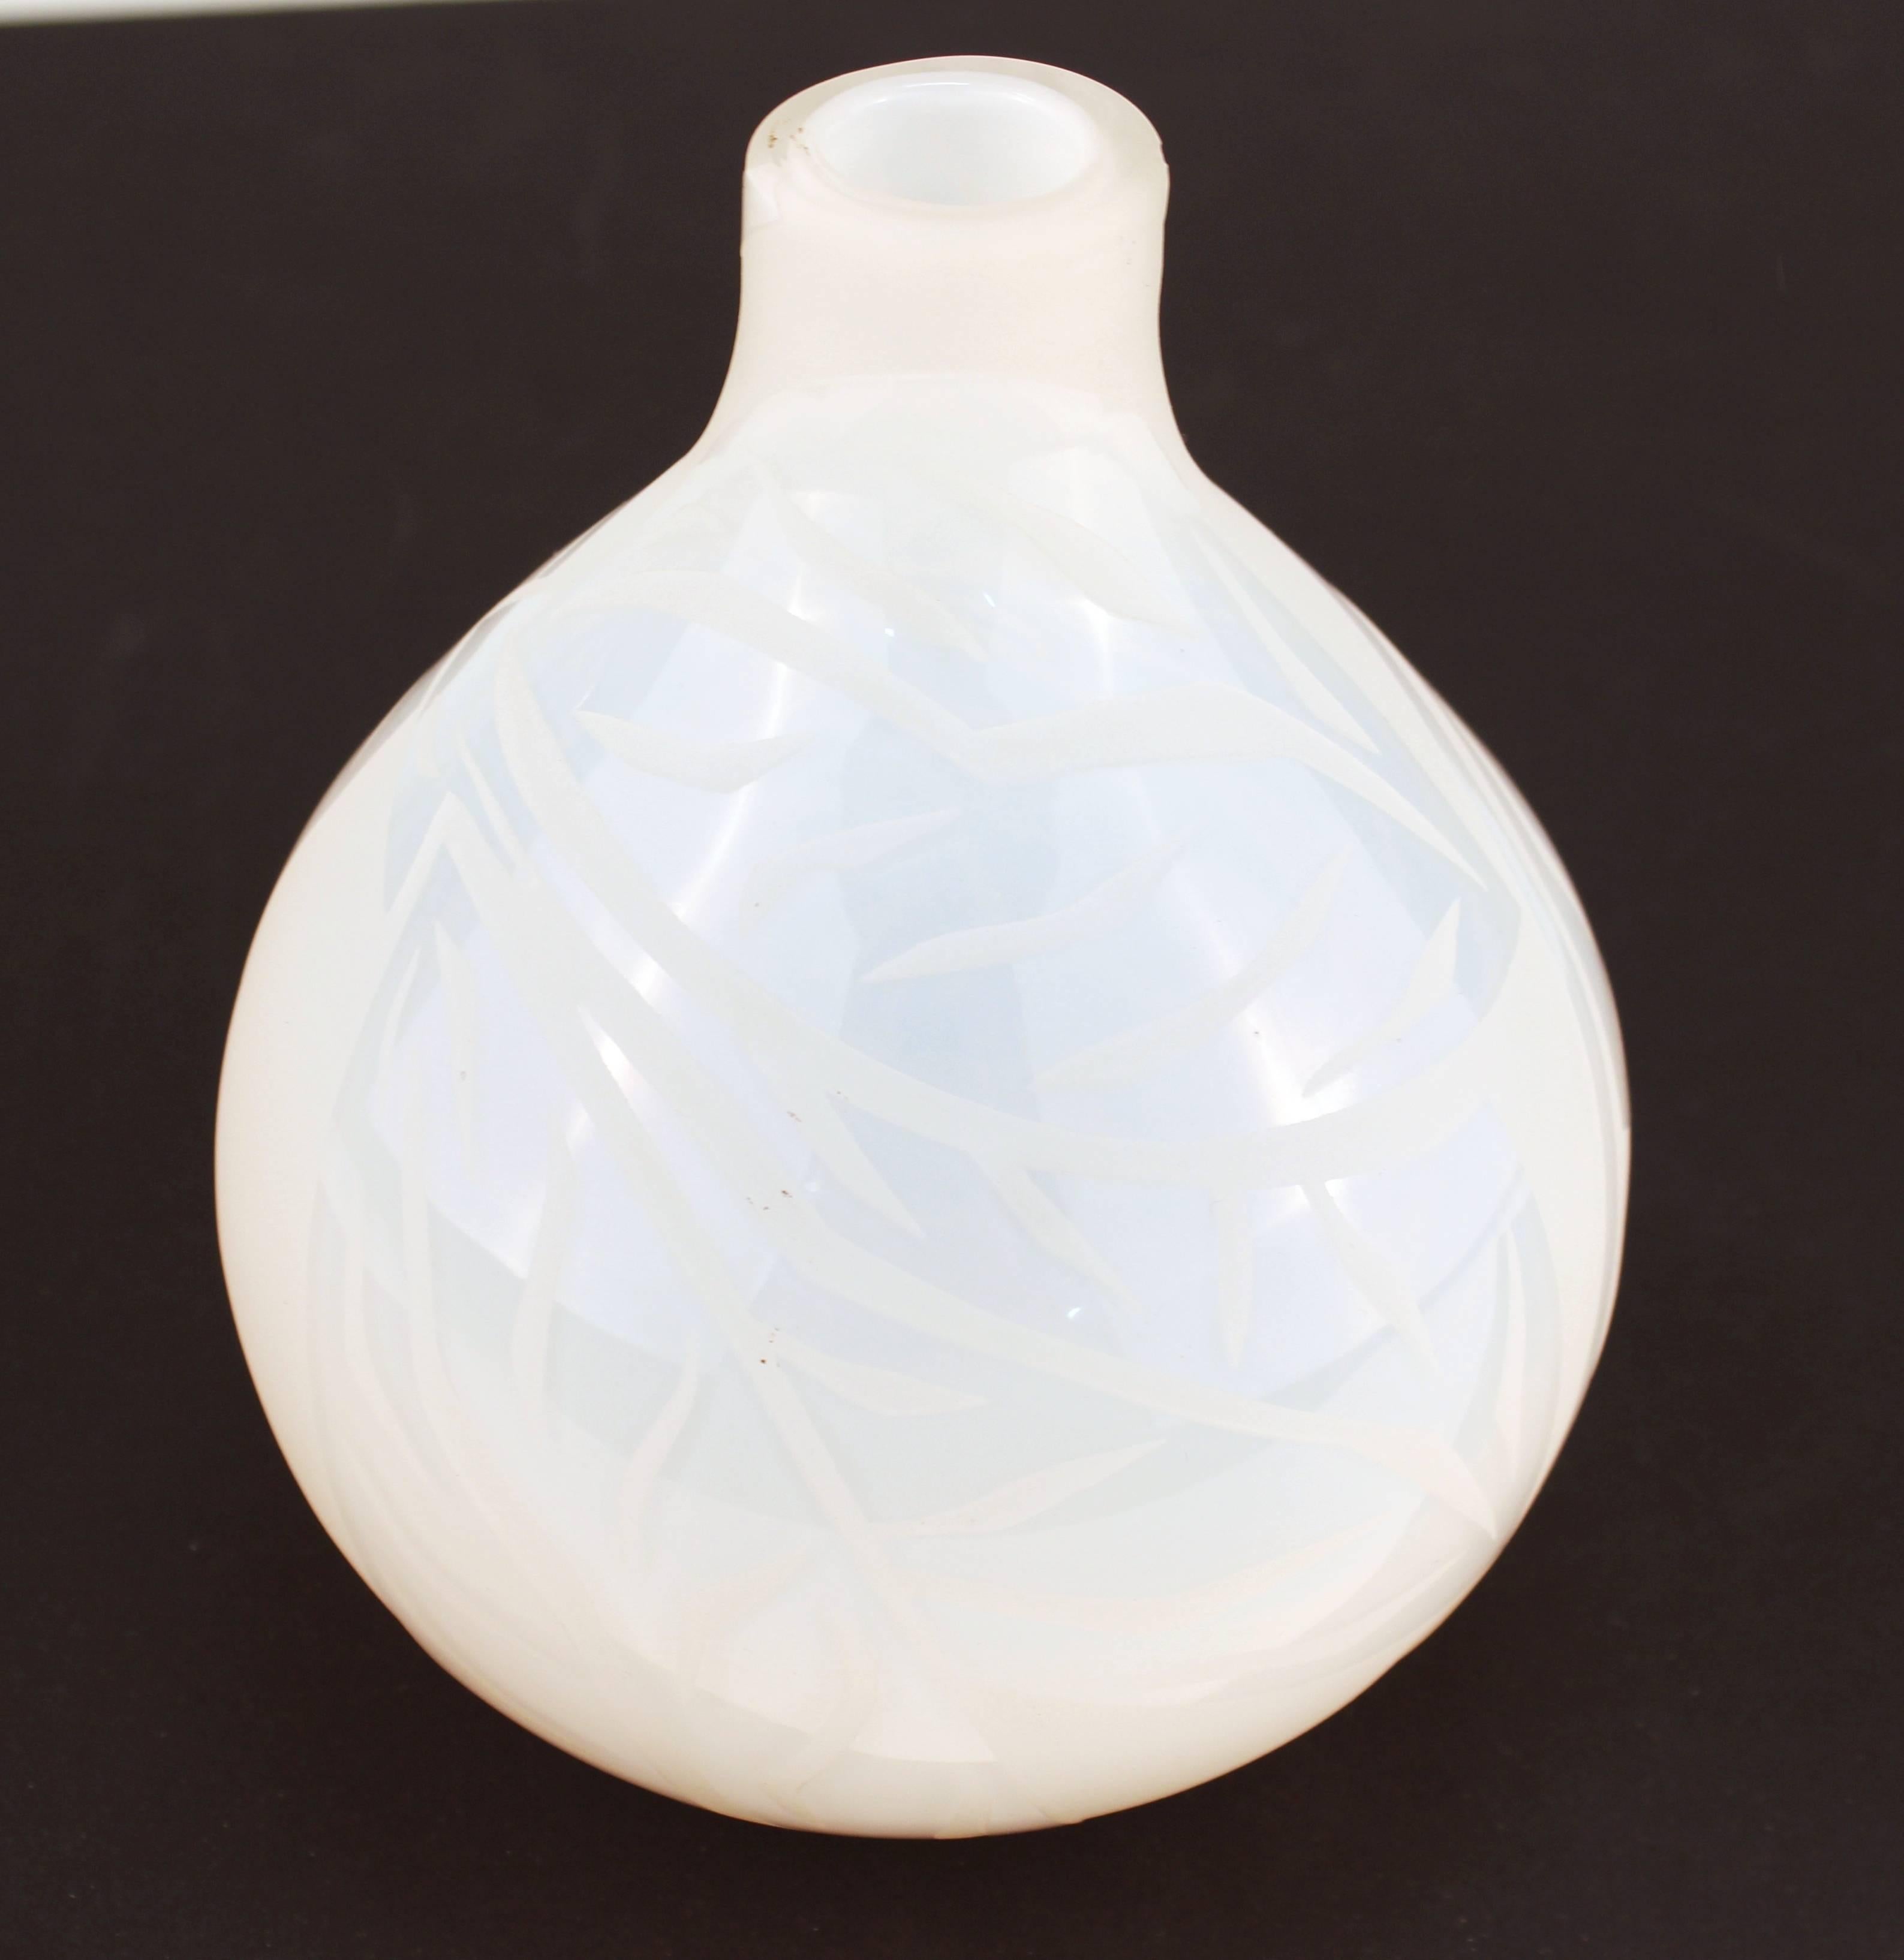 Vase in white glass from the mid-20th century. Produced with a bulb base, tiny neck and narrow mouth. The piece features a leaf motif around the body of the vase. Wear appropriate to age and use. The vase remains in good vintage condition.